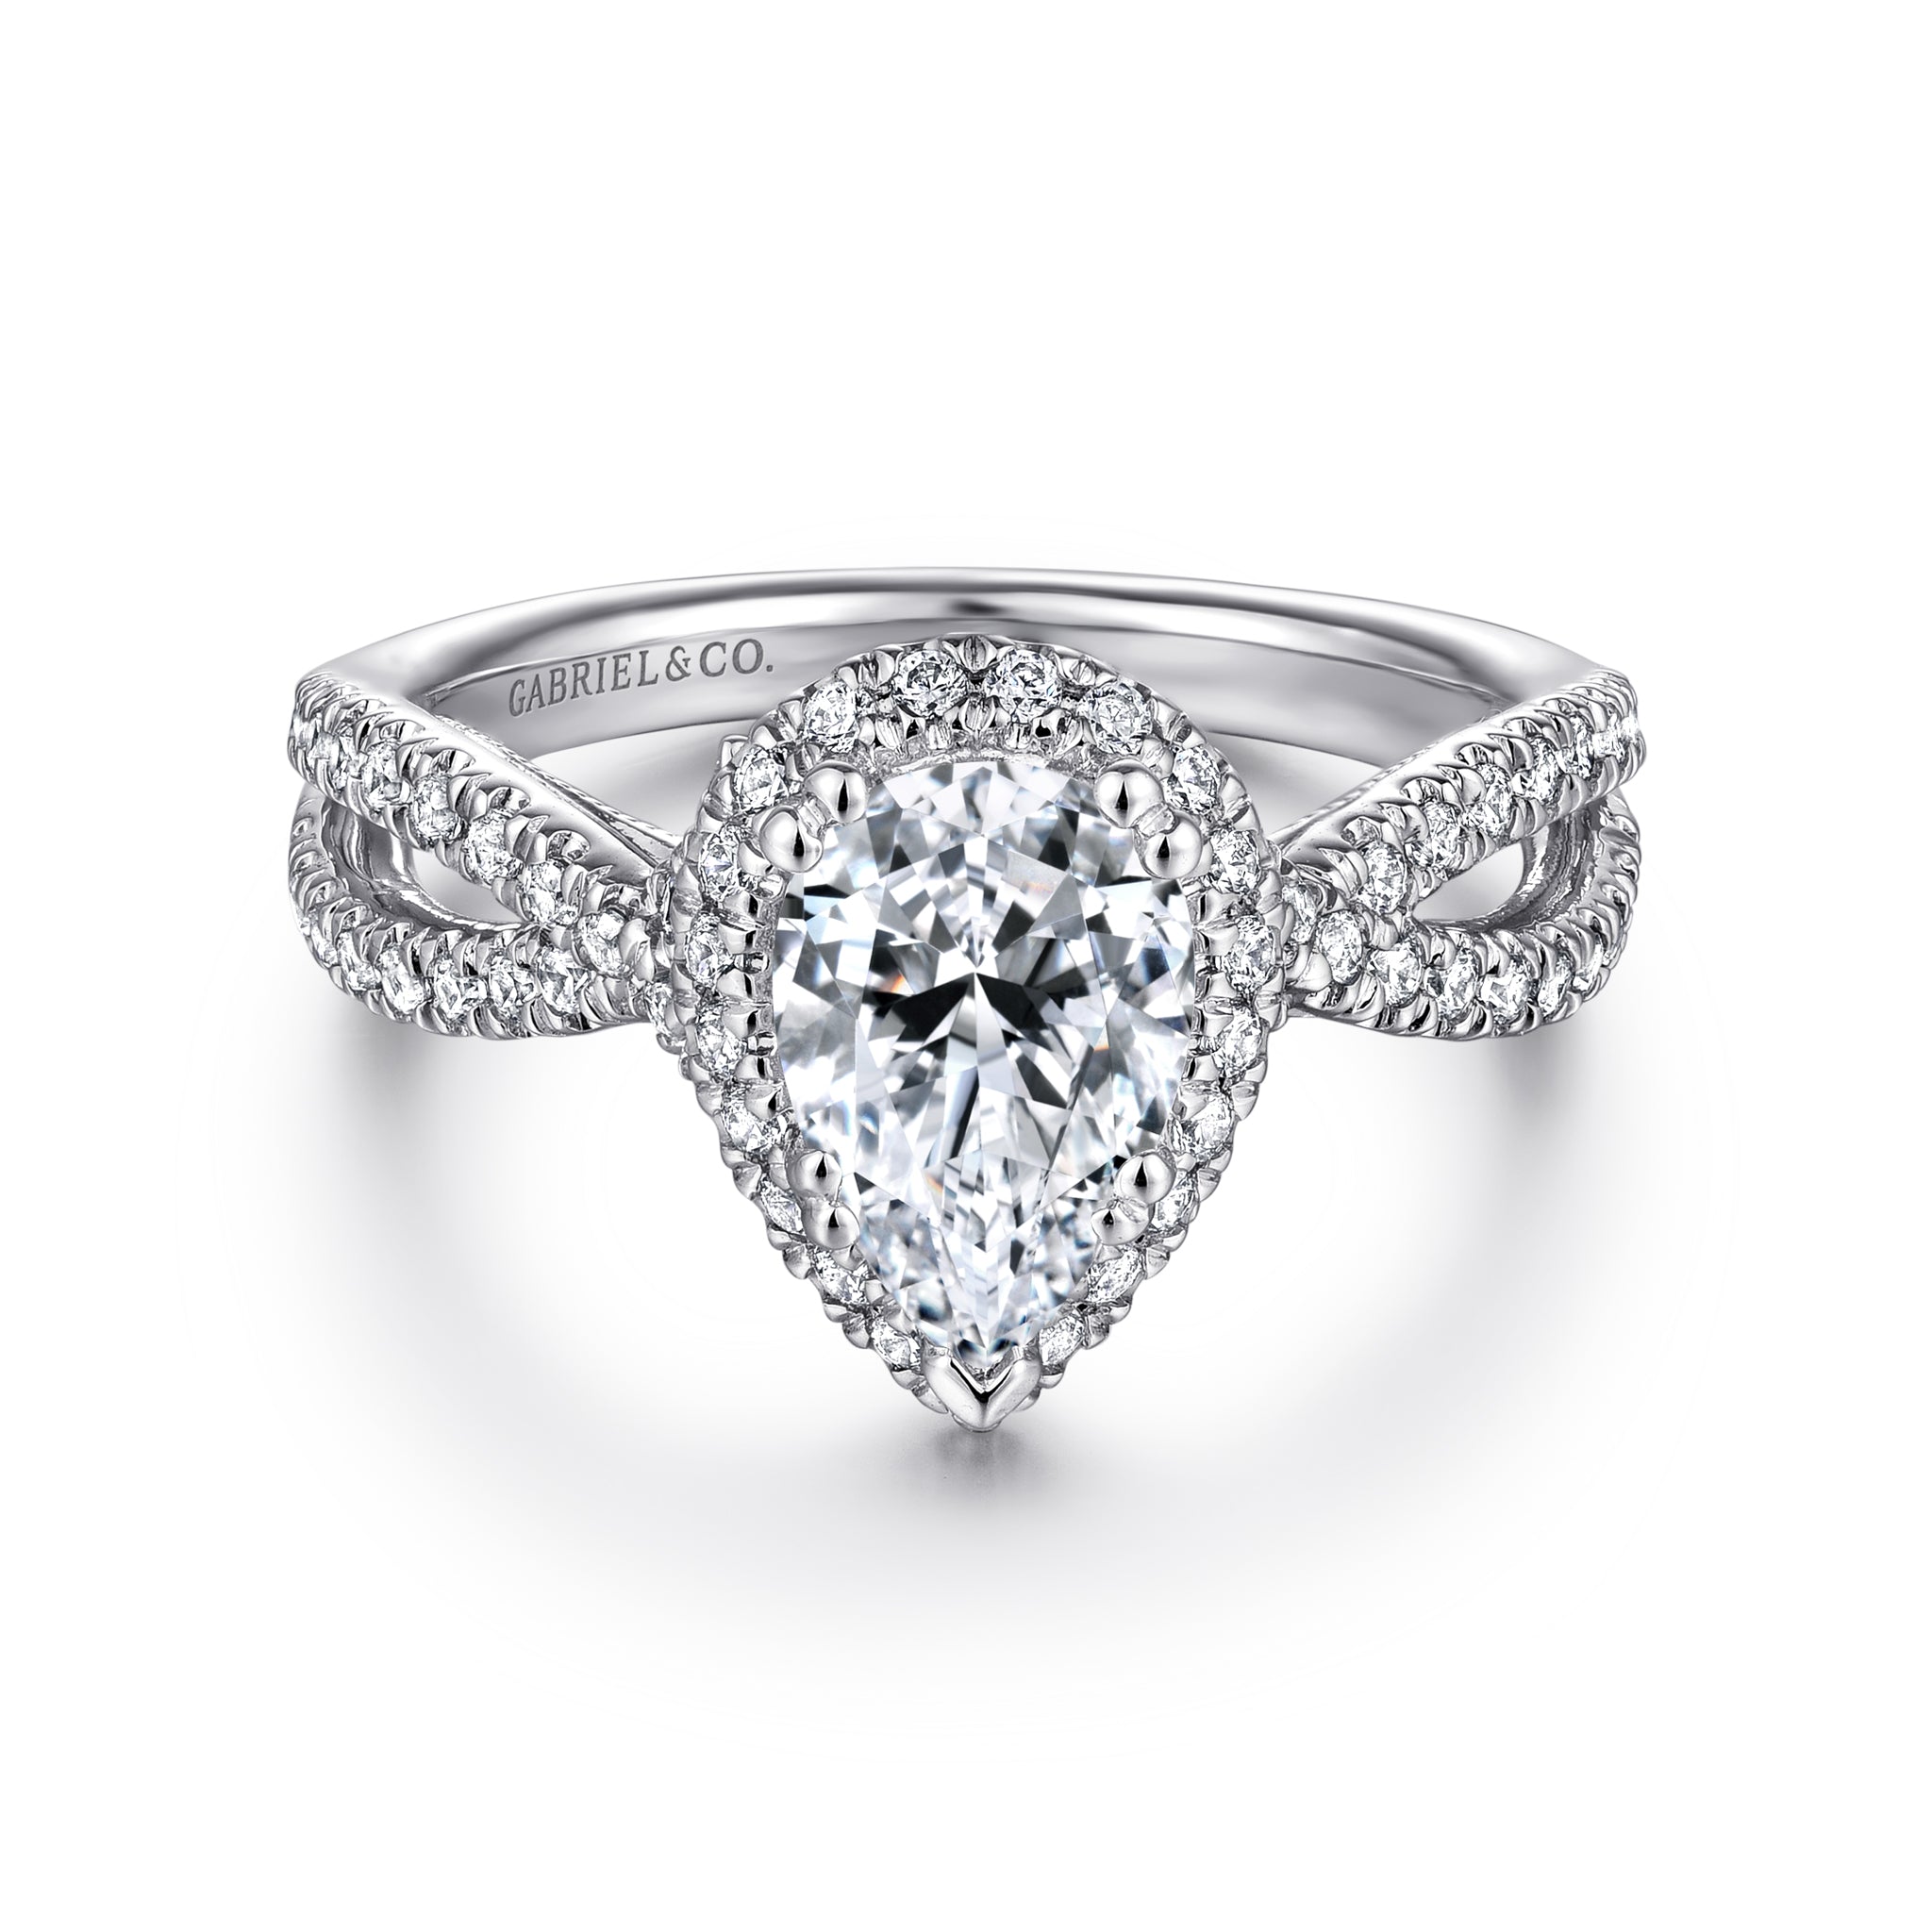 Pear Halo Engagement Ring Setting